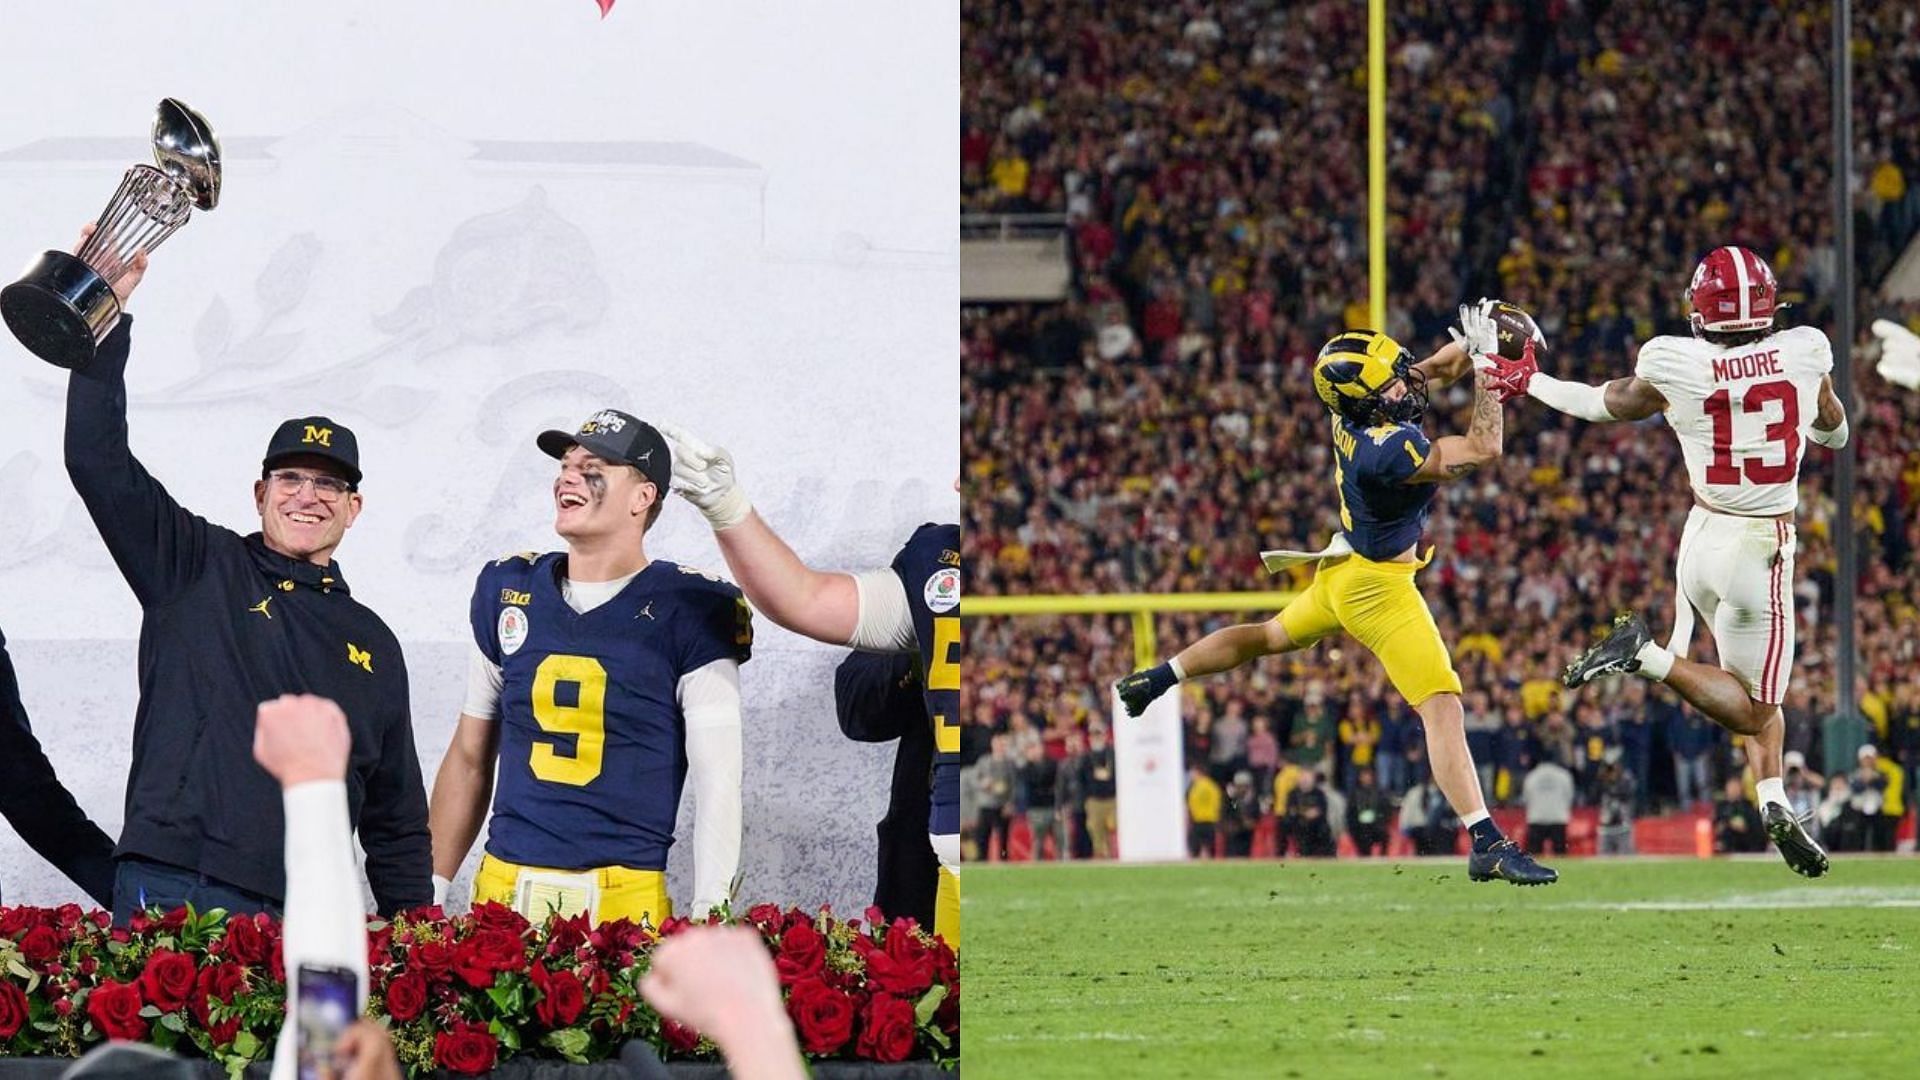 Jim Harbaugh has brought the Michigan Wolverines back into the fold